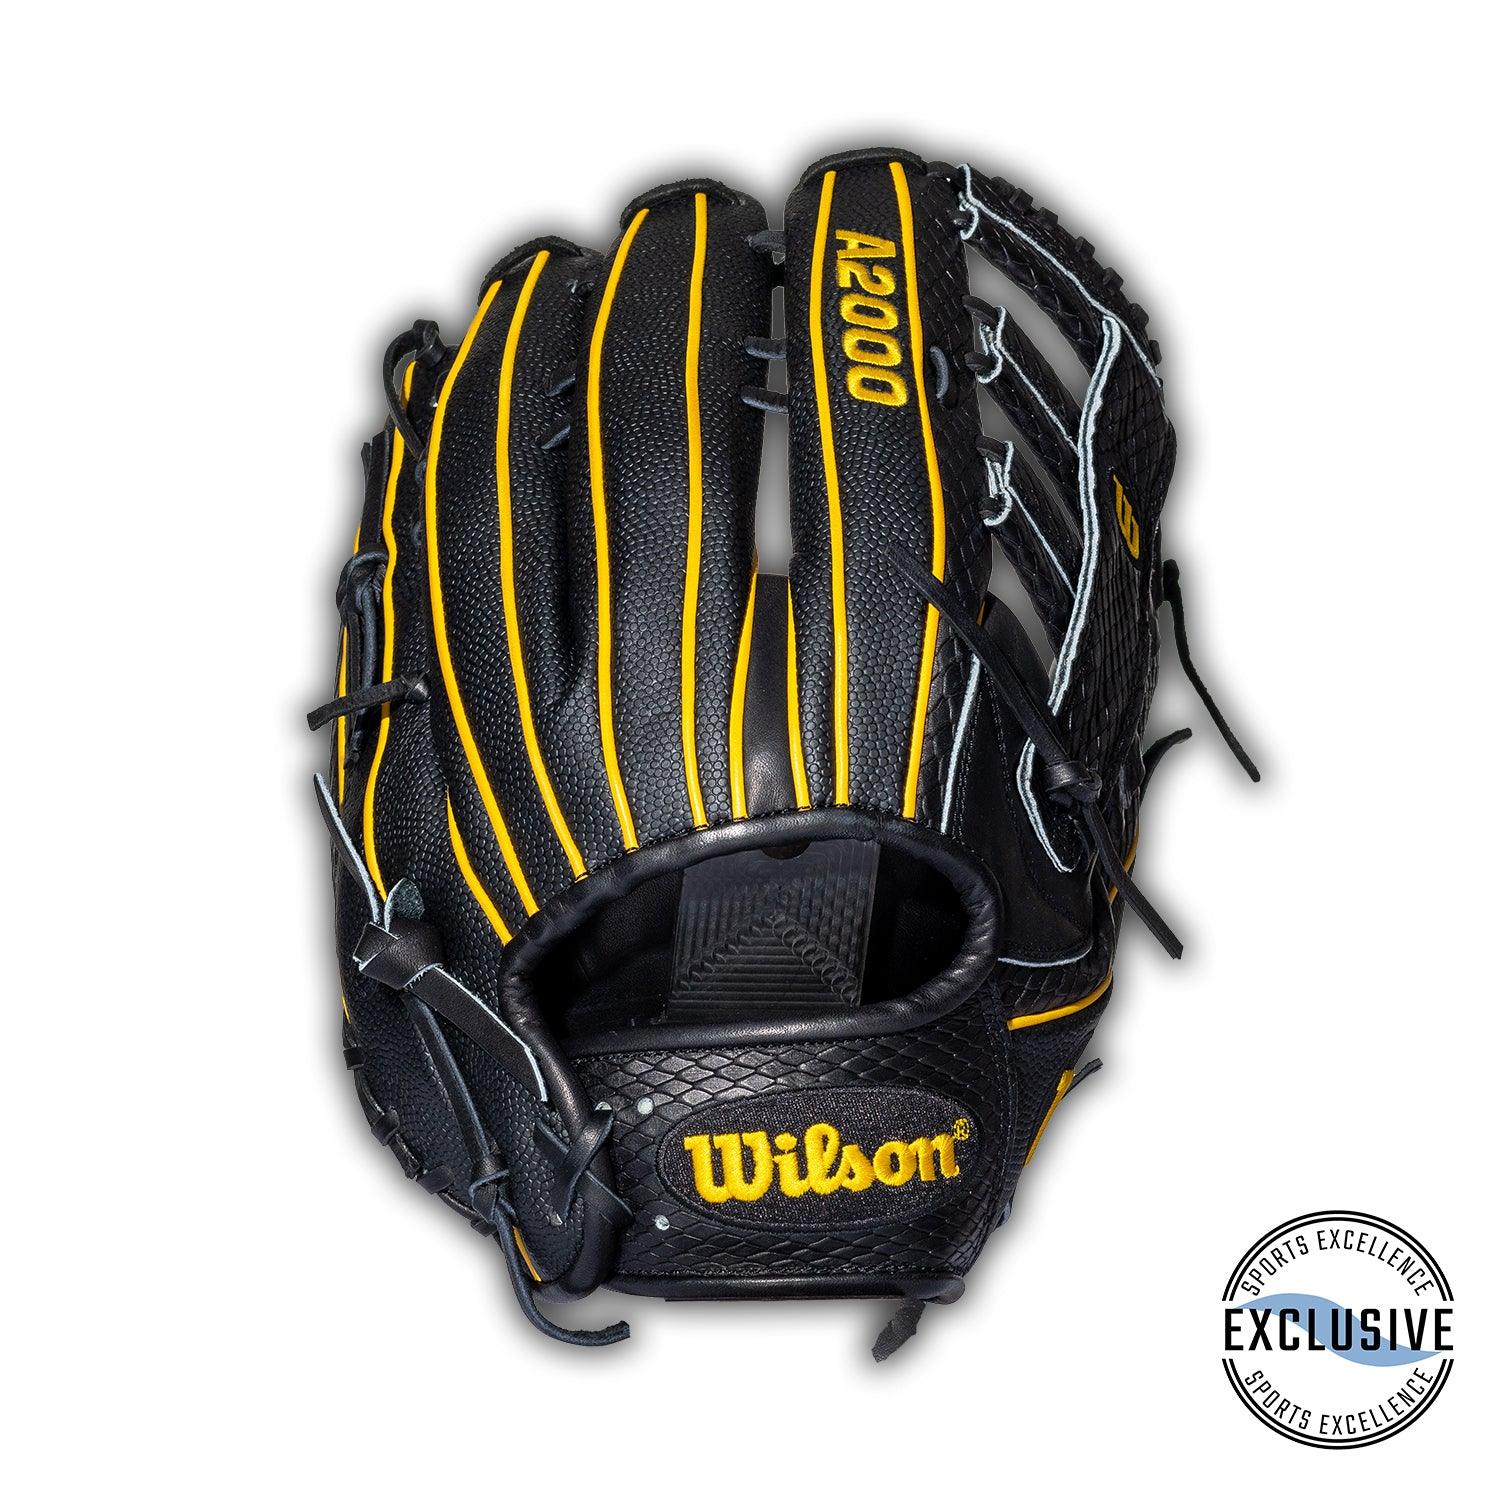 A2000 Slow Pitch 13" Superskin Glove - Sports Excellence